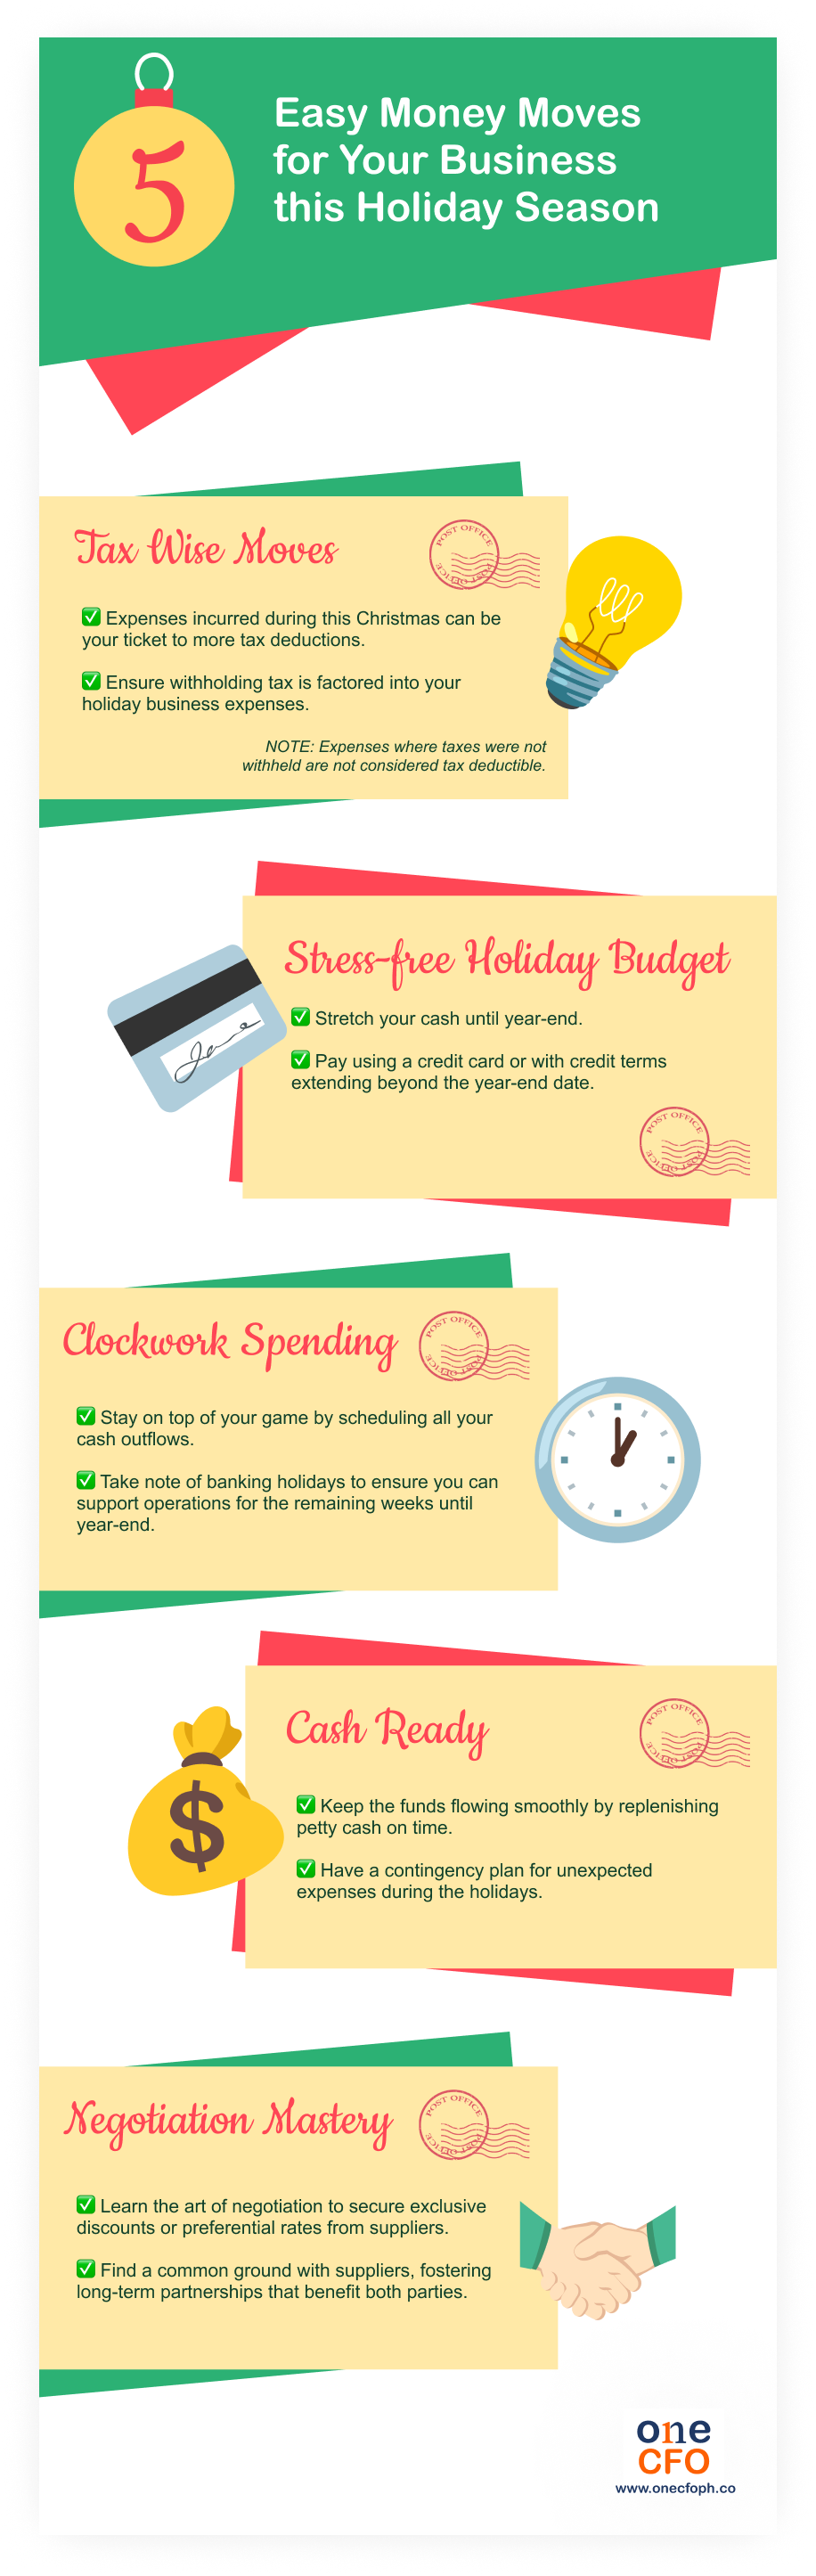 An infographic showing the five easy money moves to manage expenses this holiday season.